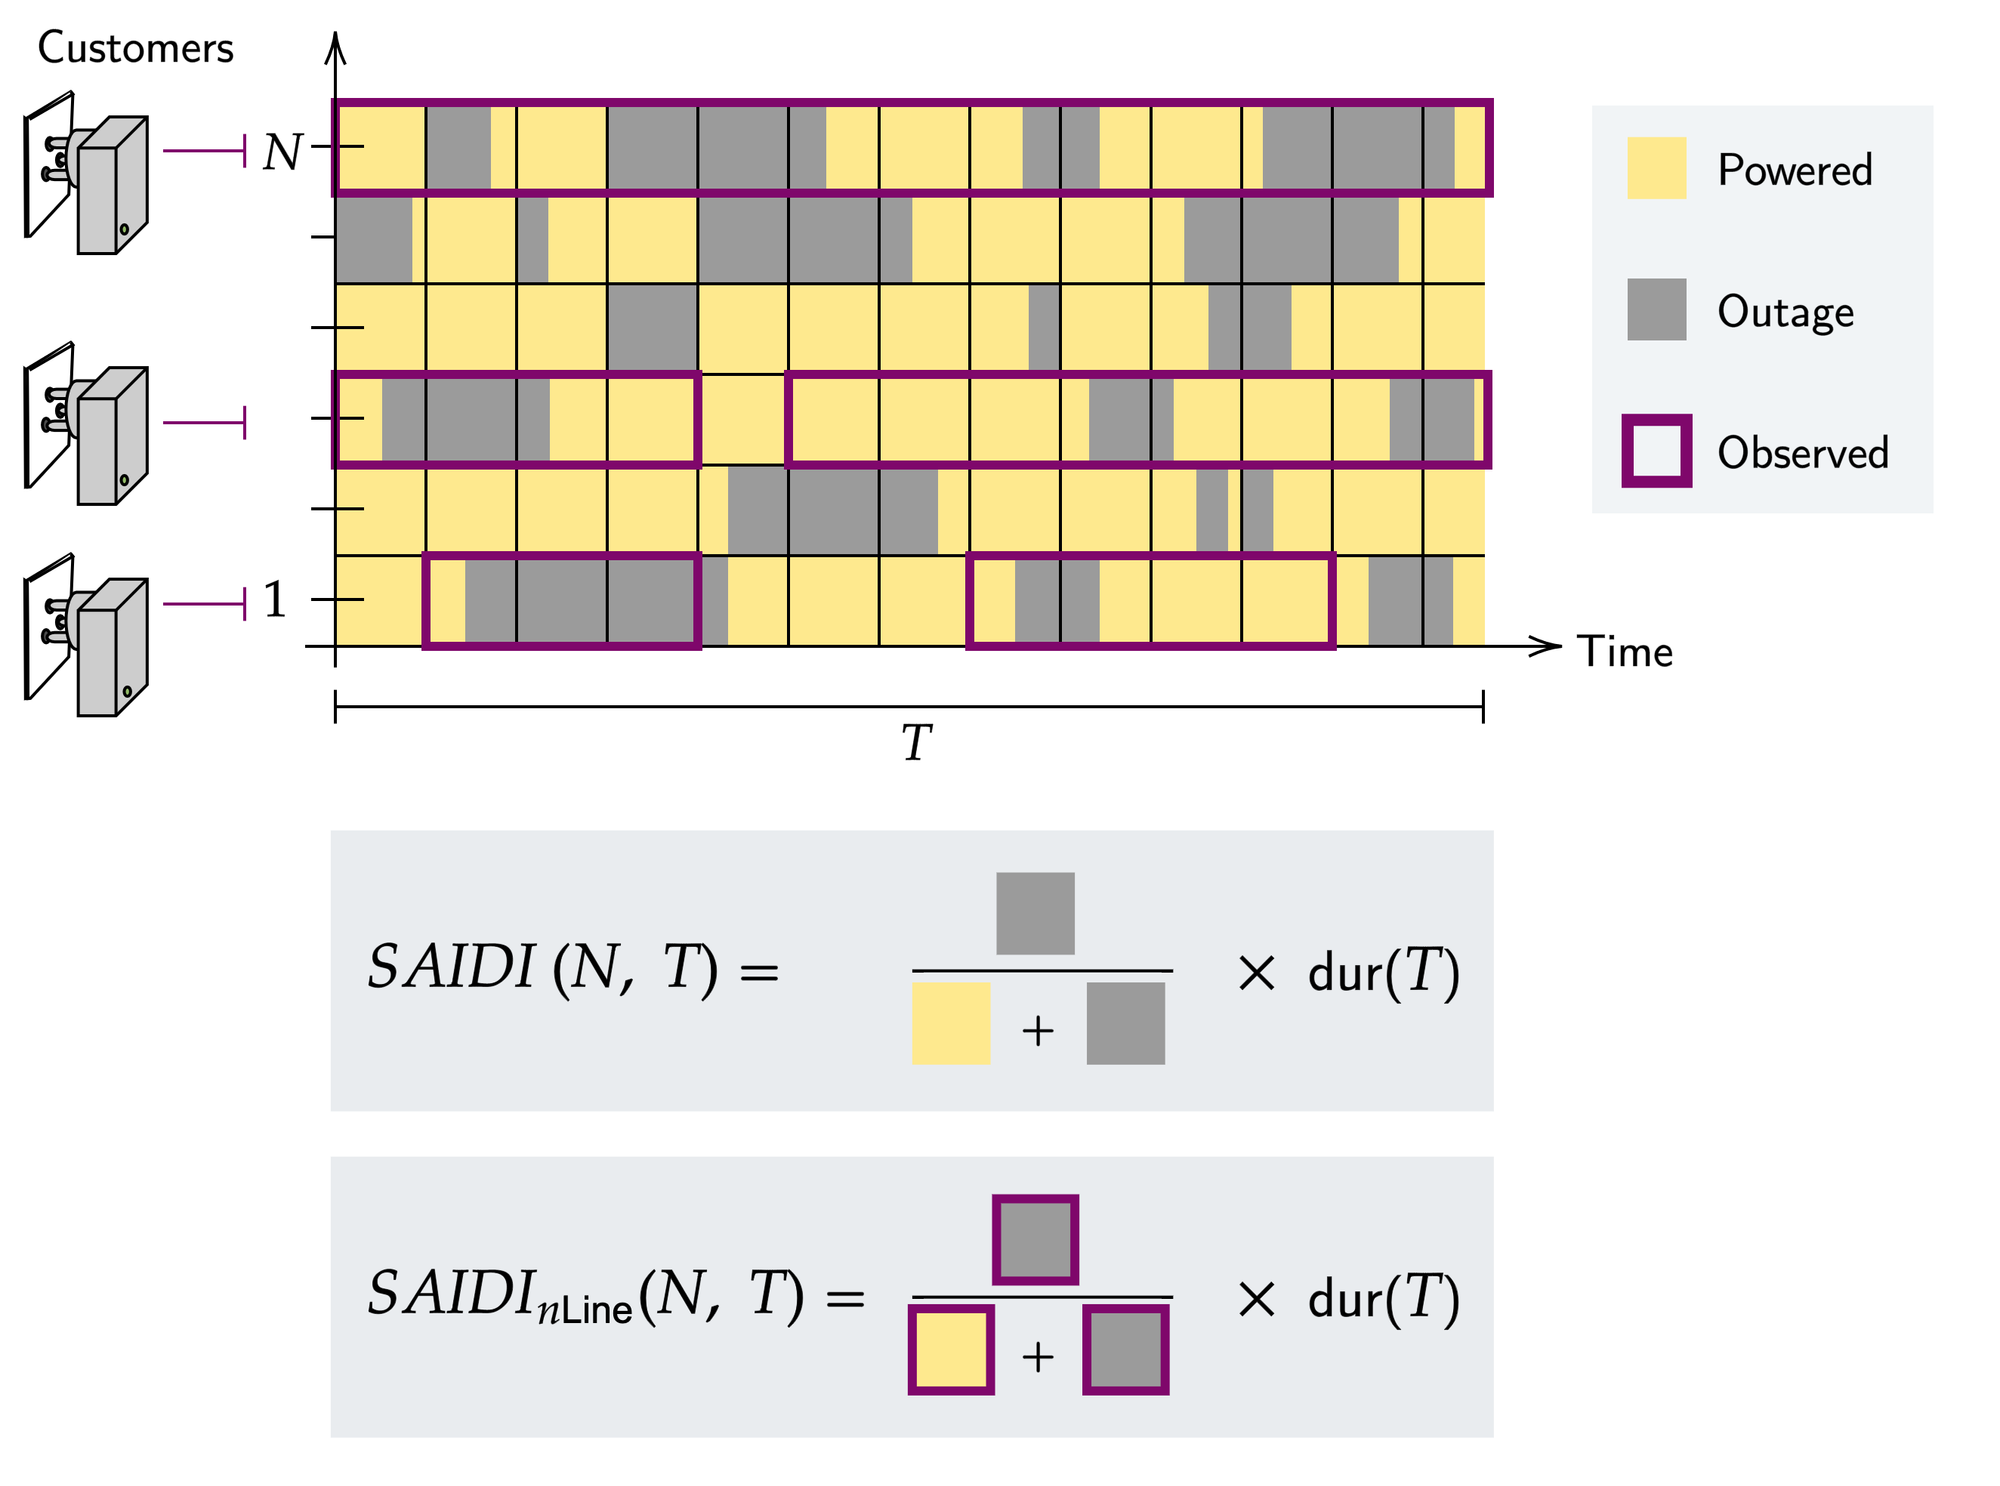 Figure 3. Each sensor observes more or less time at its customer. Observed time at customers that have PowerWatch devices are shown in purple boxes. The top row represents an outlet where the PowerWatch captured the entire period (no unsensed time). Yellow regions are time where the given customer/sensor was receiving power from the outlet; grey, time where the customer/sensor was experiencing an outage.